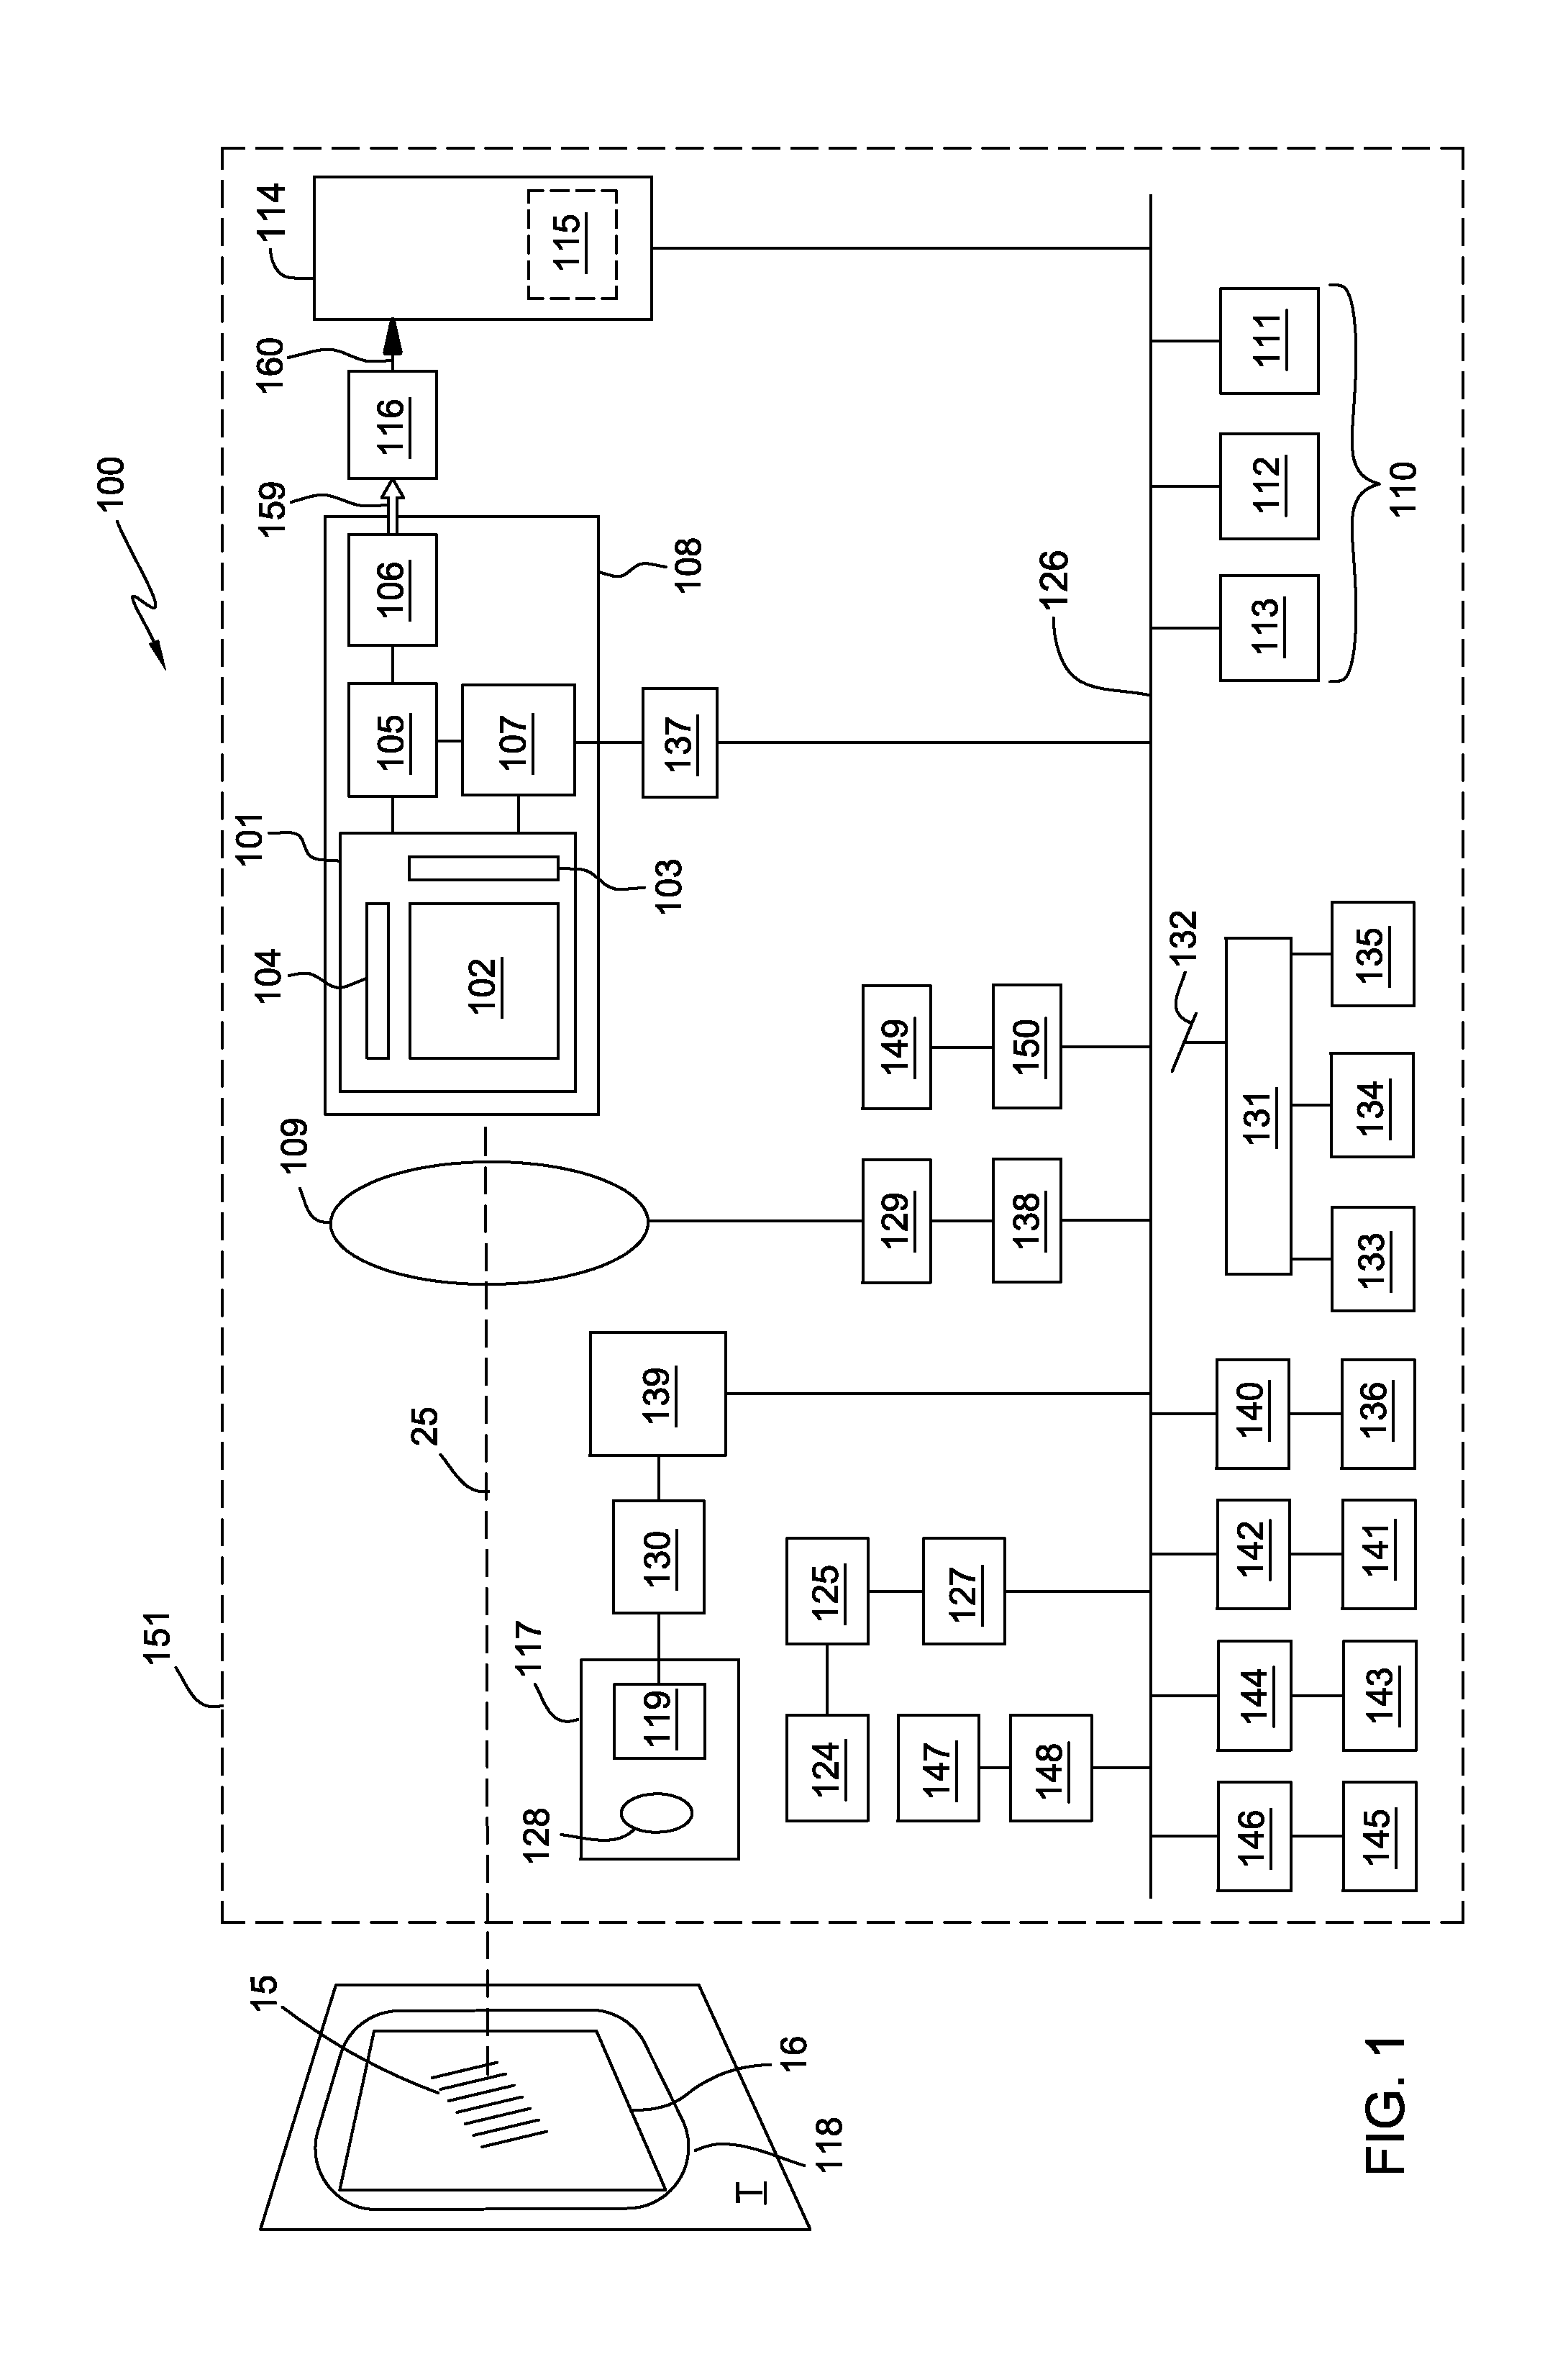 User interface facilitating specification of a desired data format for an indicia reading apparatus